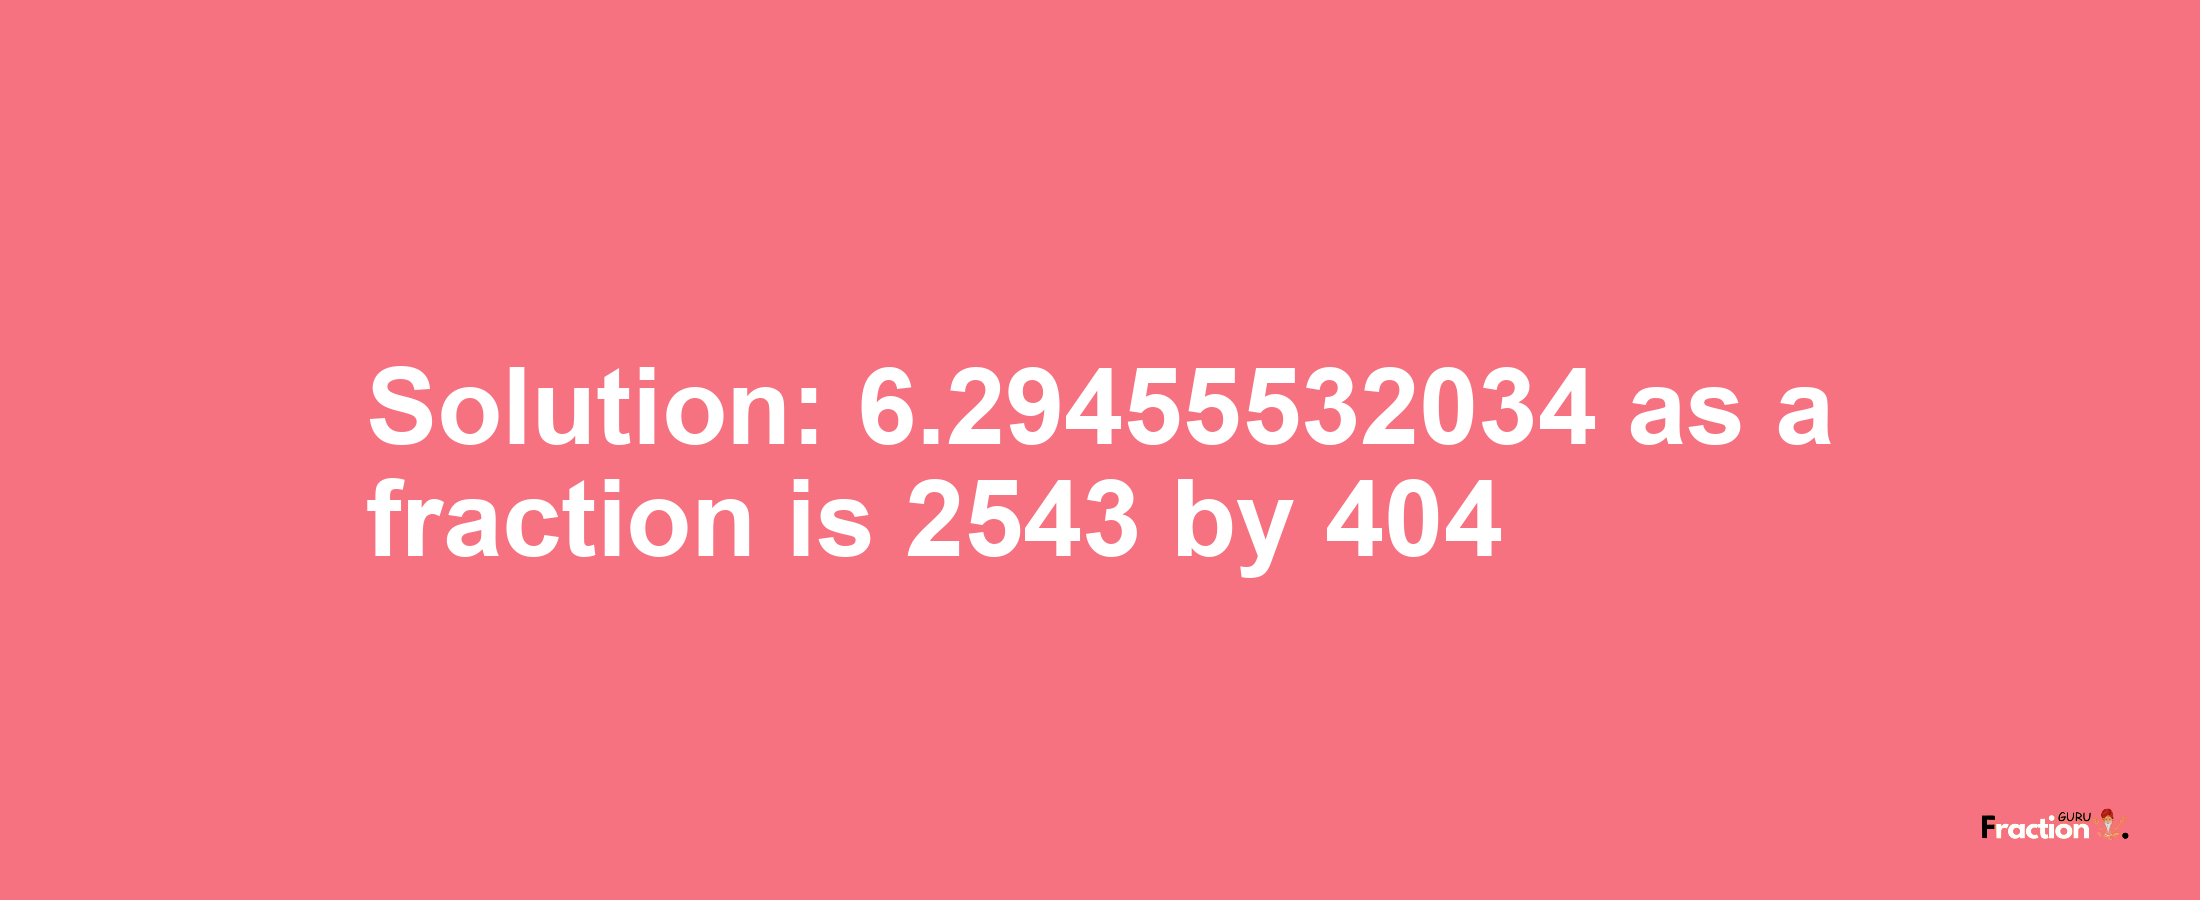 Solution:6.29455532034 as a fraction is 2543/404